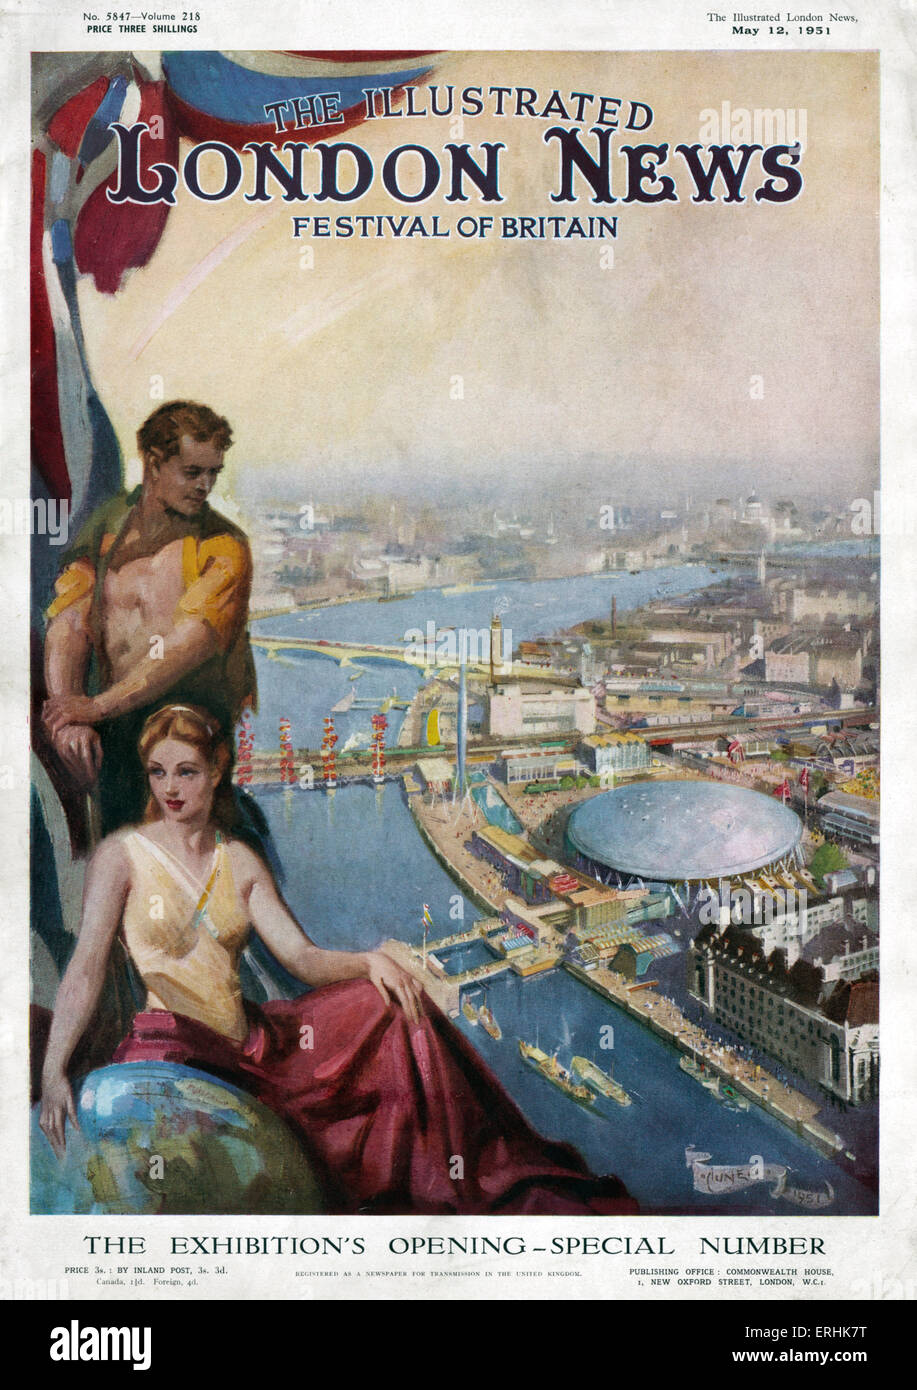 Festival of Britain special issue of The Illustrated London News, May 12, 1951. Front cover showing the South Bank,  Dome of Stock Photo